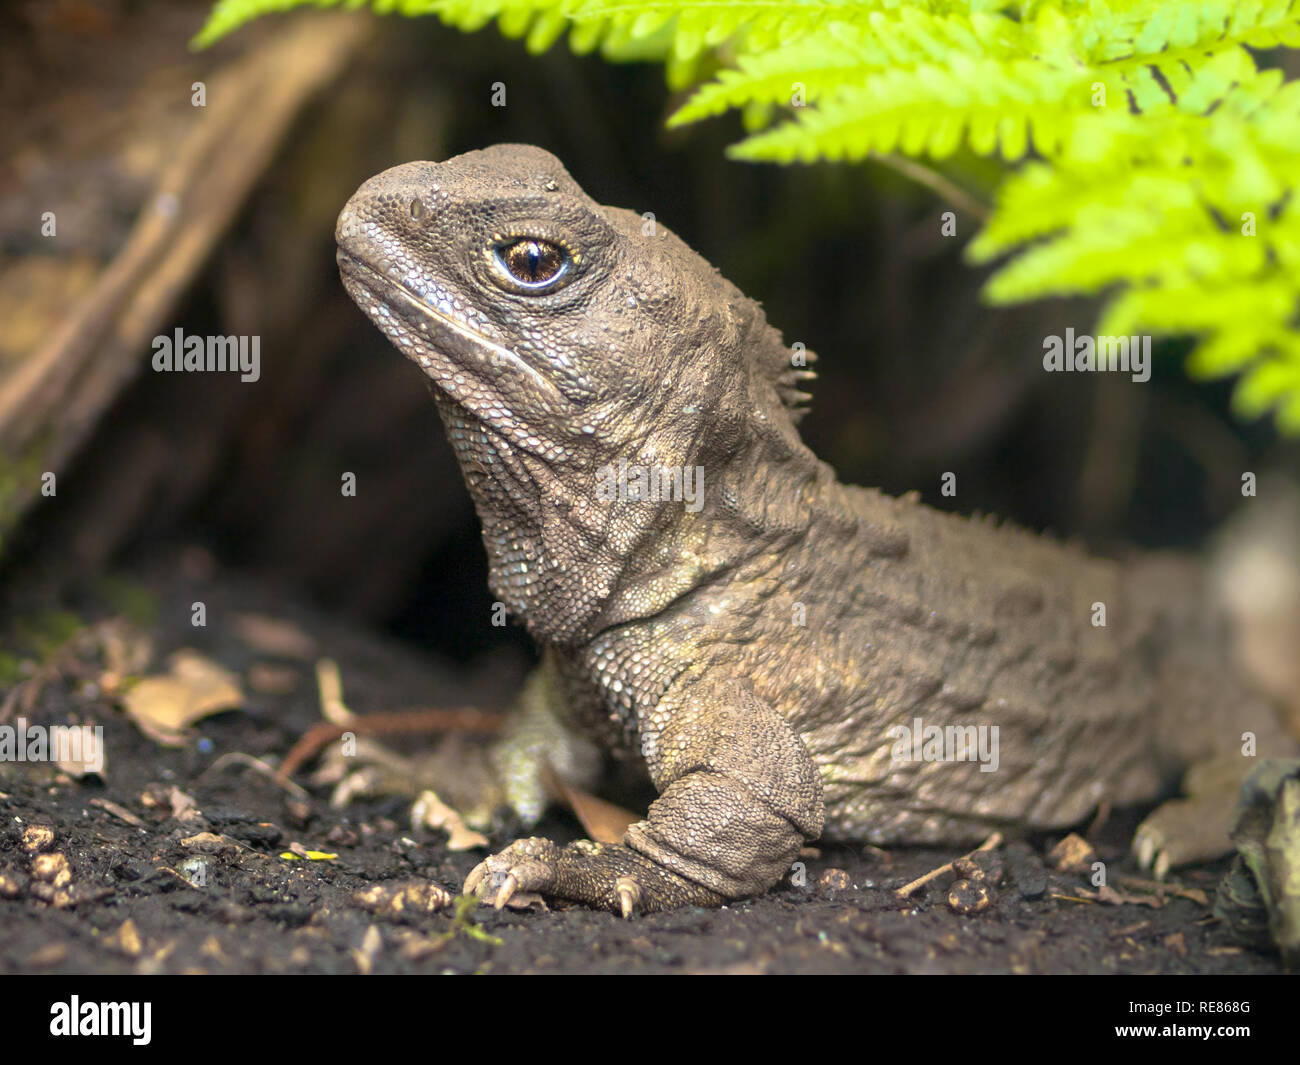 Tuatara, the living fossil, is a native and endemic reptile in new zealand. Animal in natural environment emerging from burrow Stock Photo